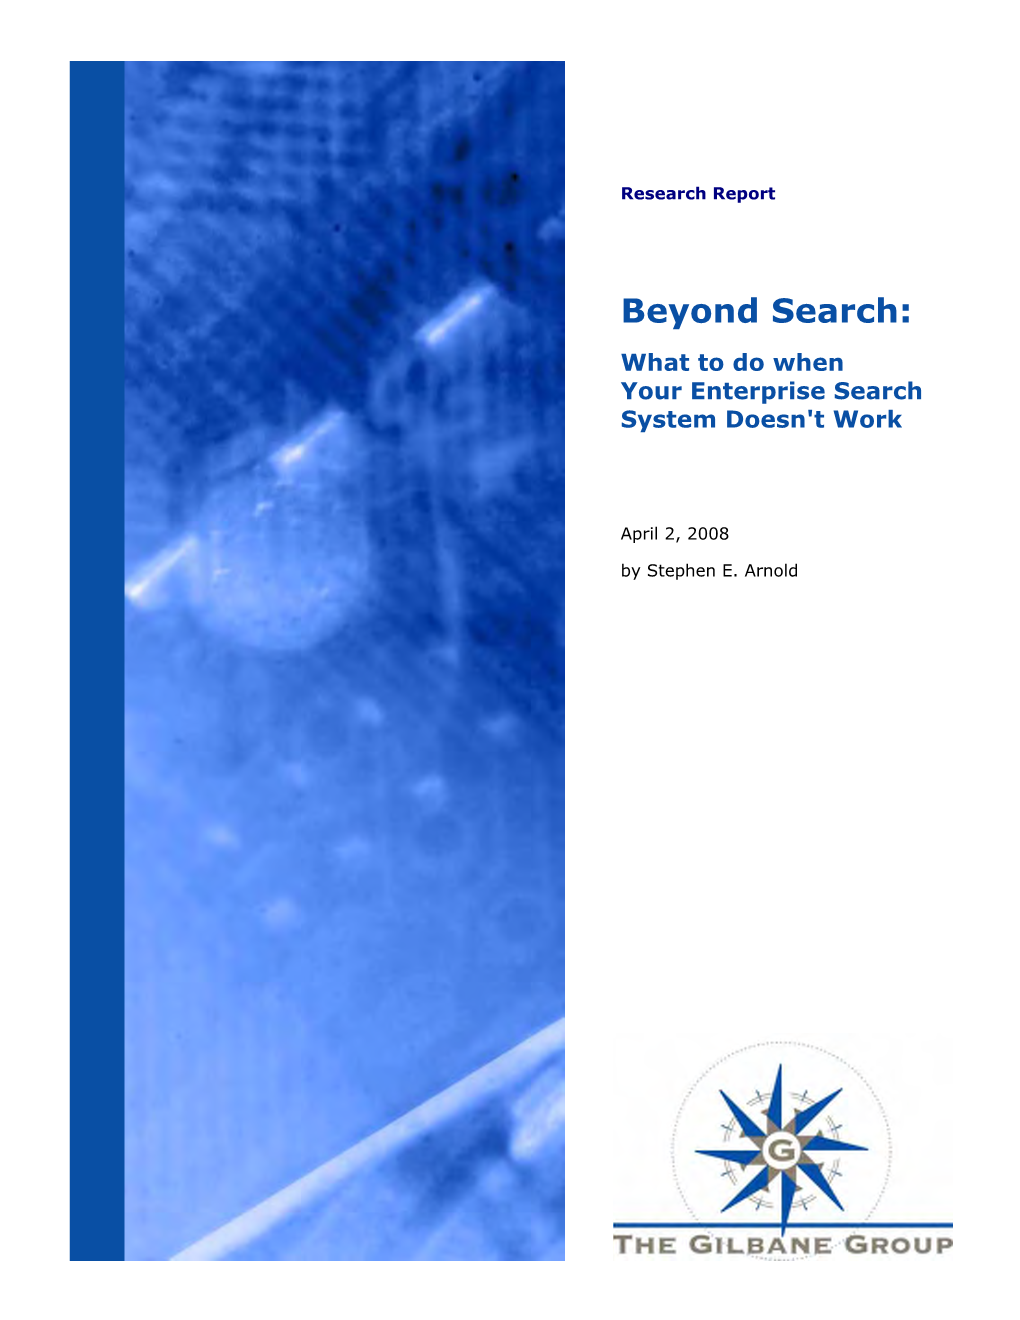 Beyond Search: What to Do When Your Enterprise Search System Doesn't Work